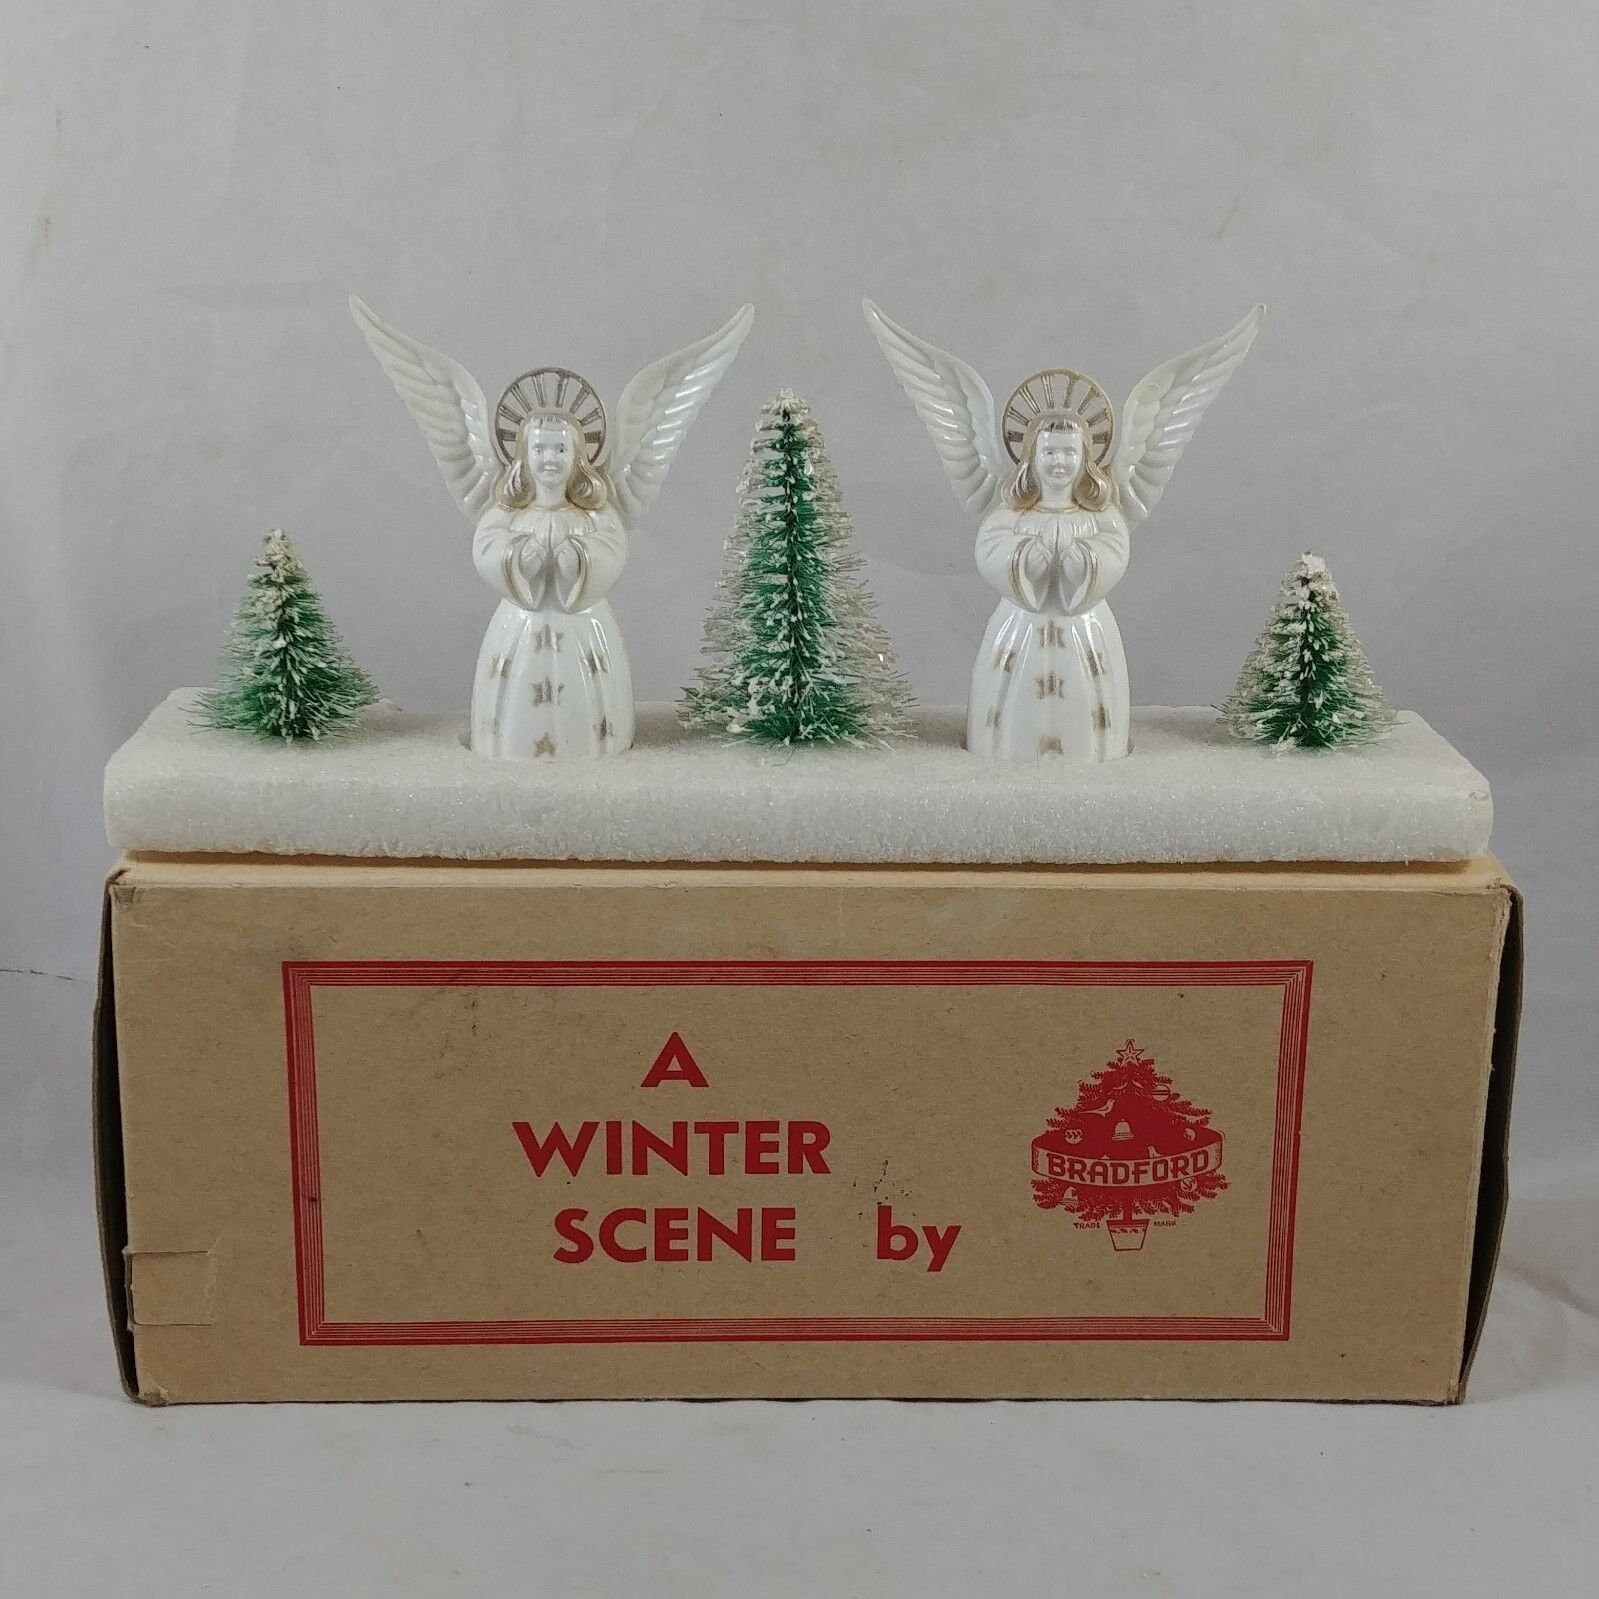 CHINA ANGELS BRADFORD EDITIONS 1st SET BOXED CERT FOR XMAS TREE DECORATIONS 